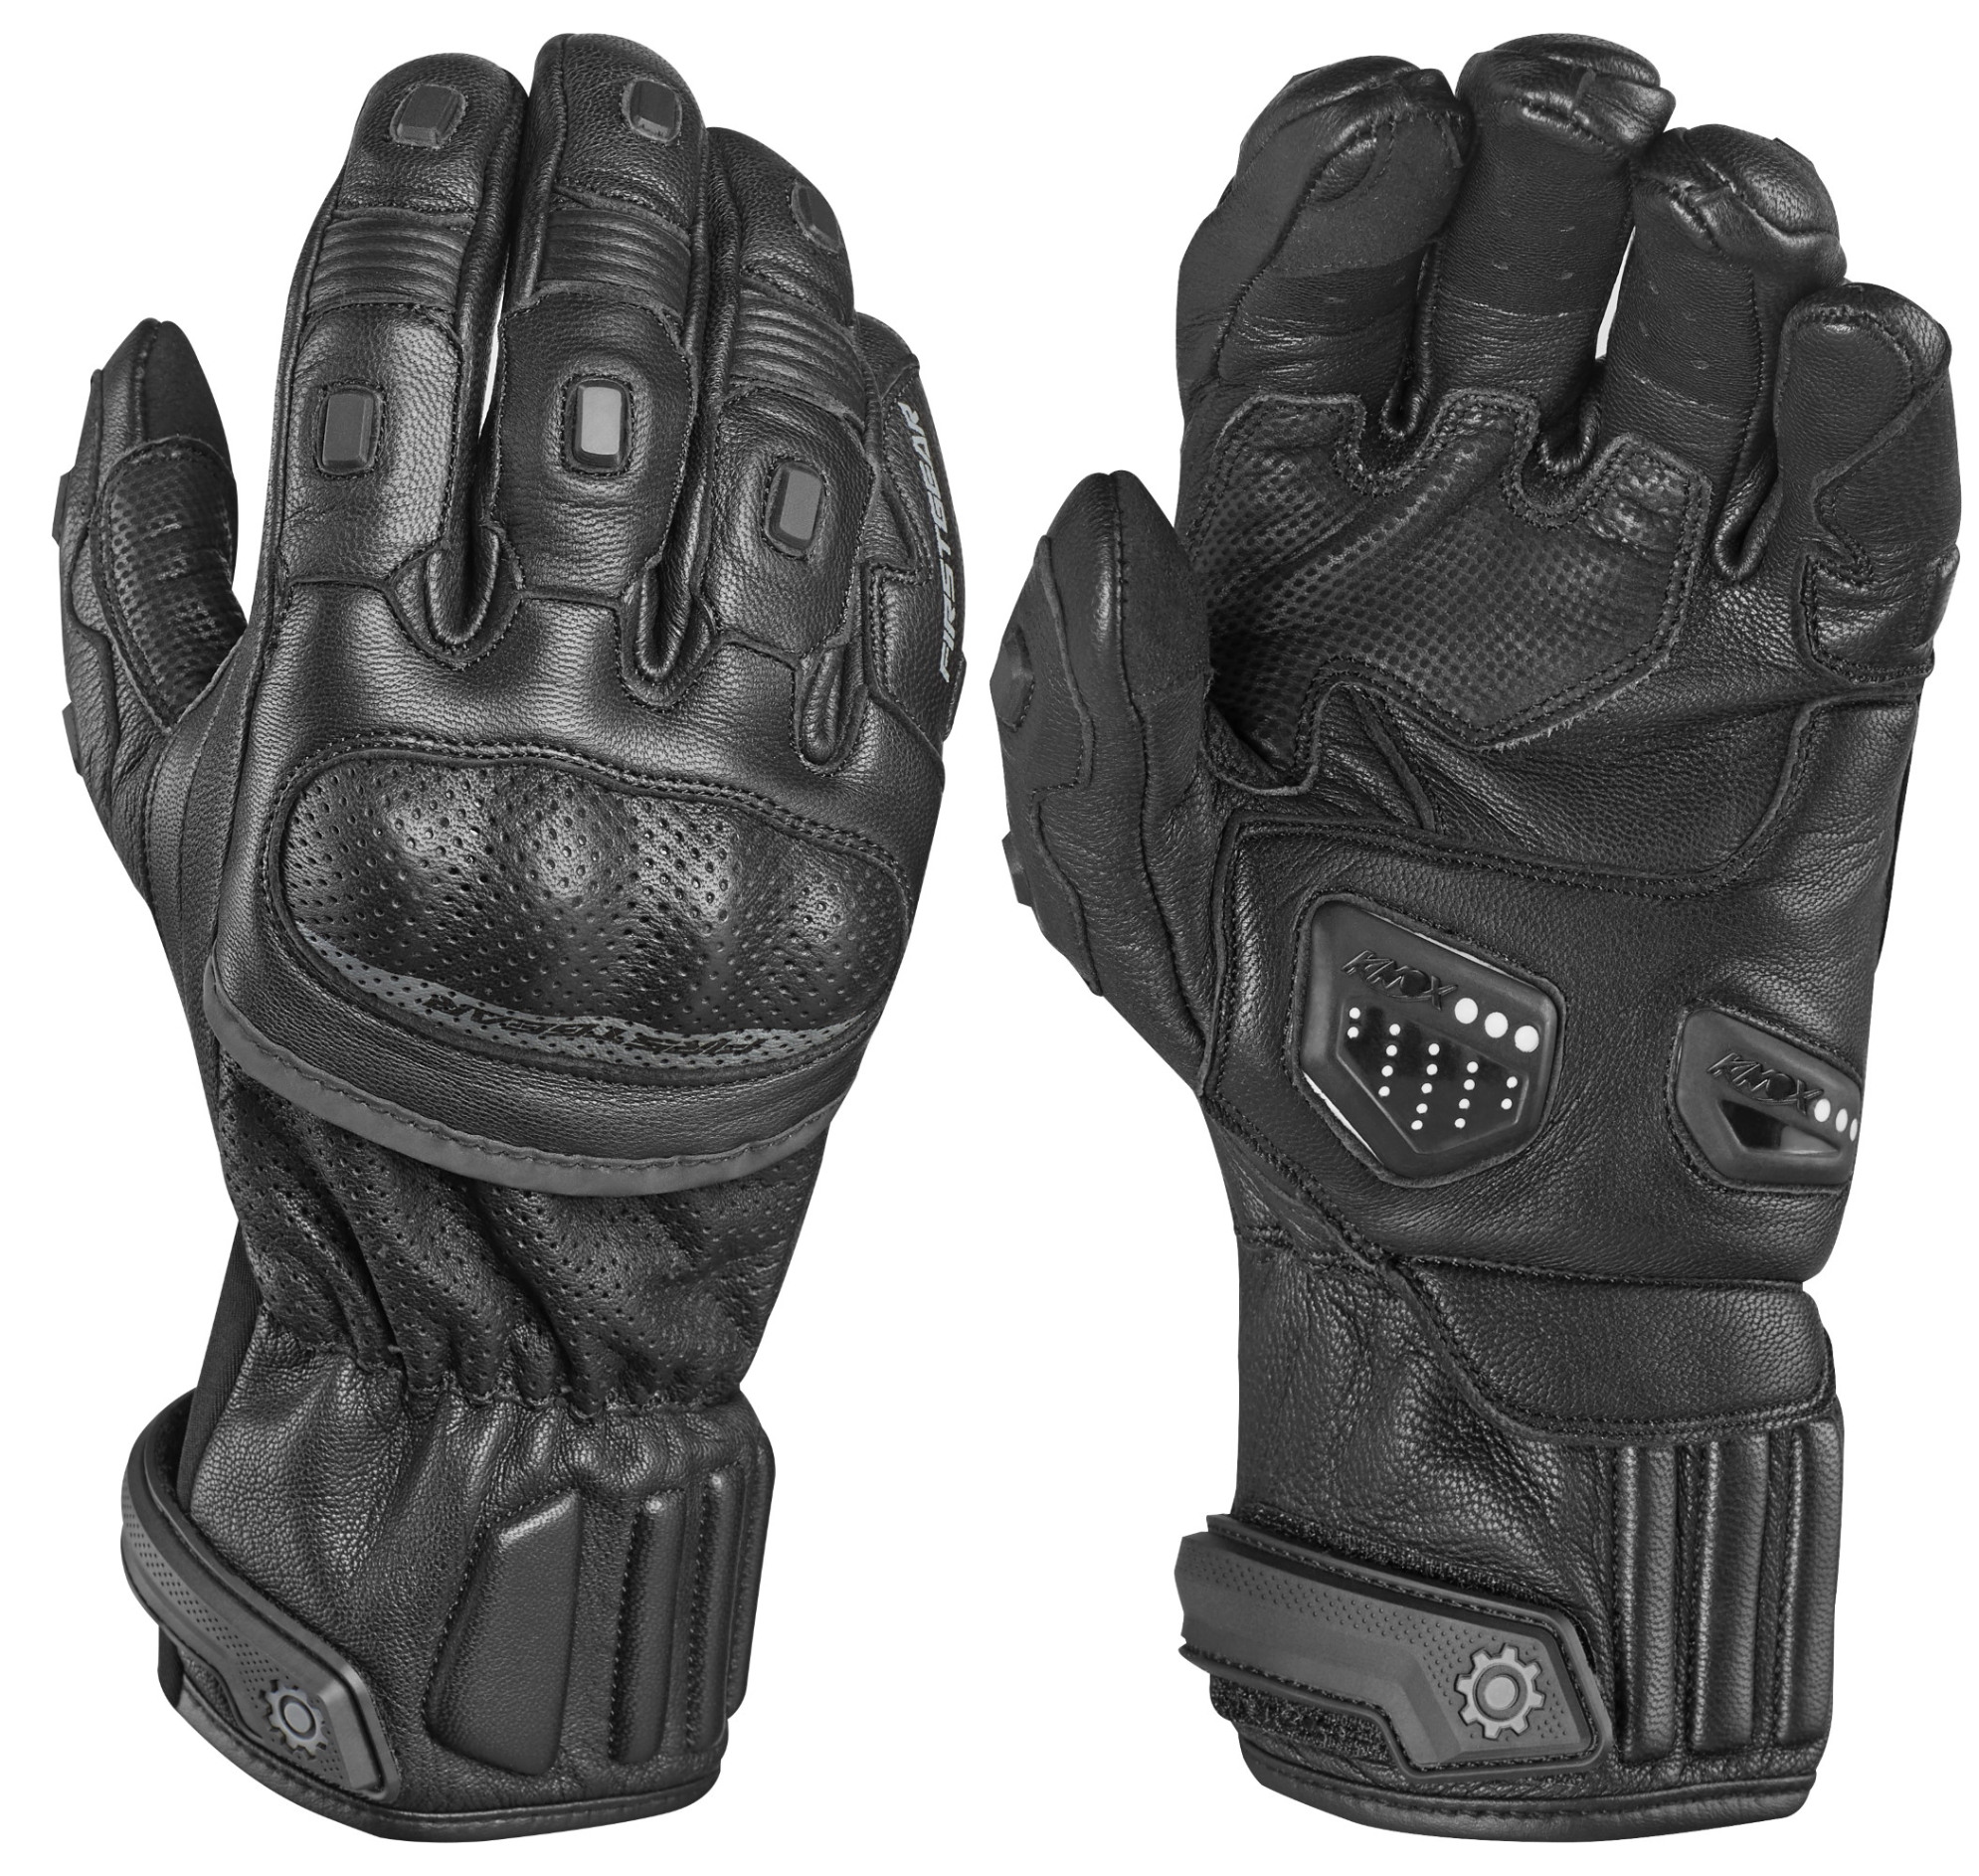 FirstGear Kinetic Sport Tour Short Mens Motorcycle Gloves Black MD - image 1 of 1